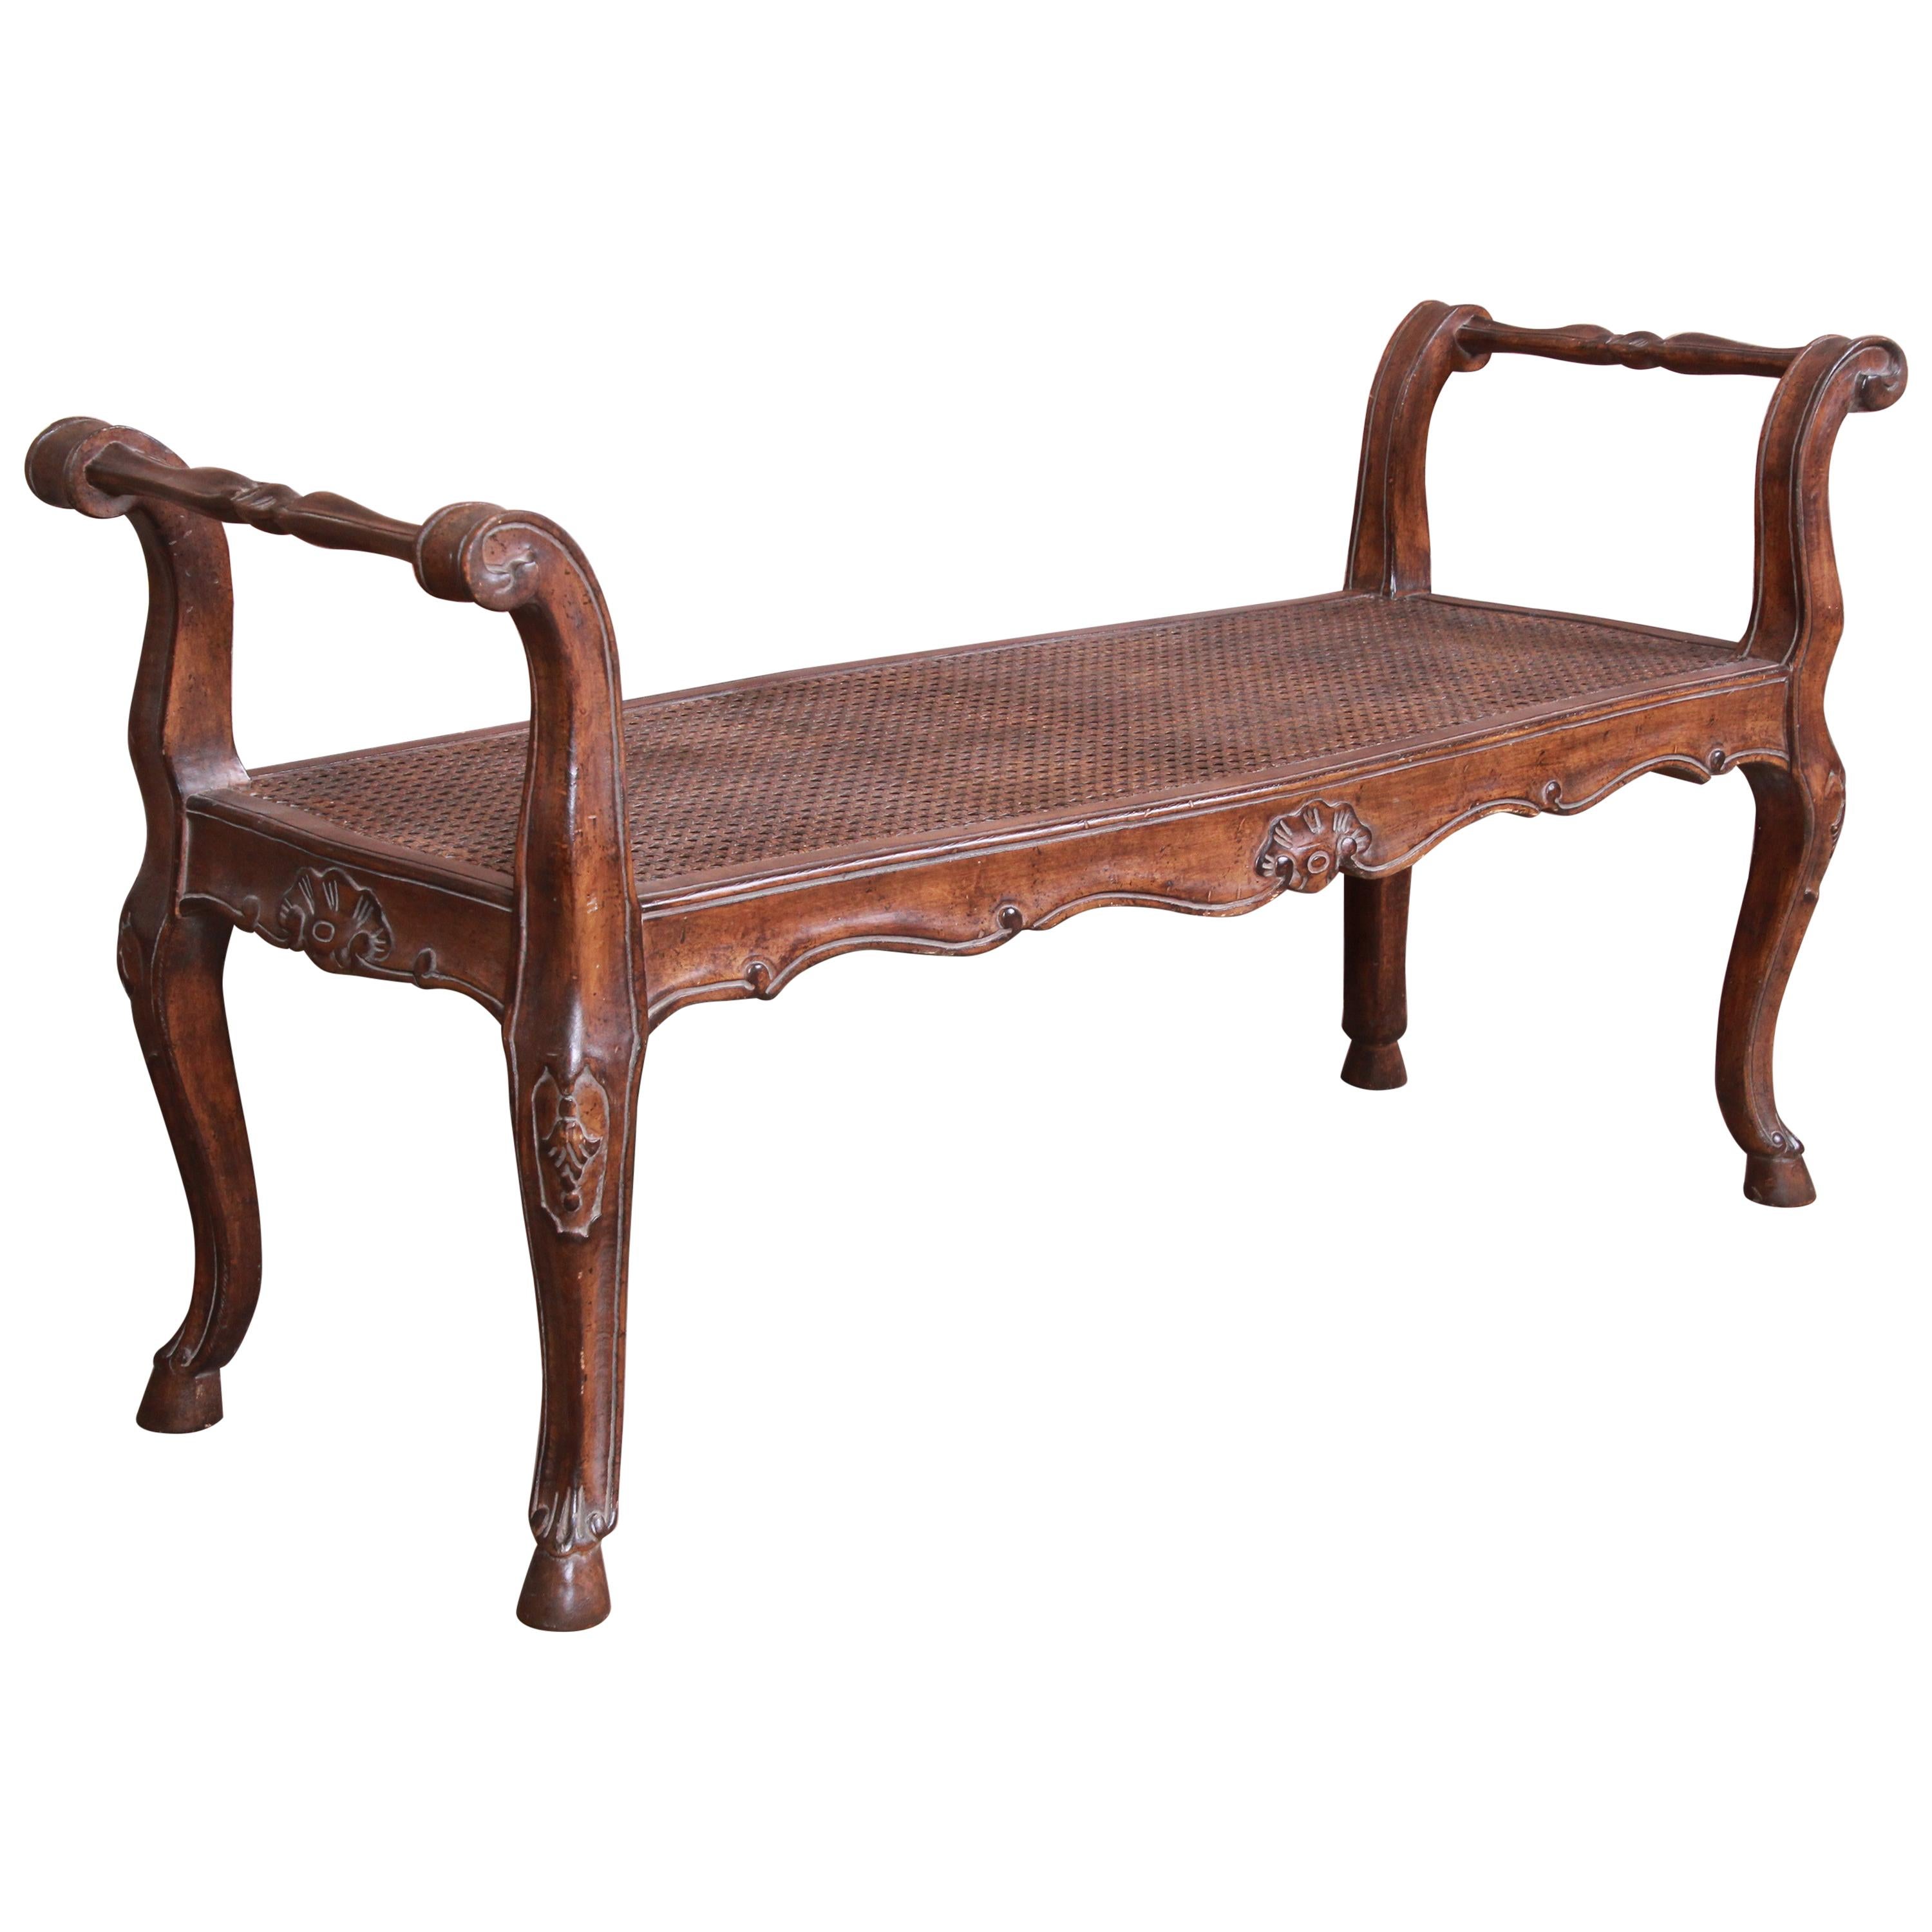 French Provincial Louis XV Carved Walnut and Cane Window Bench